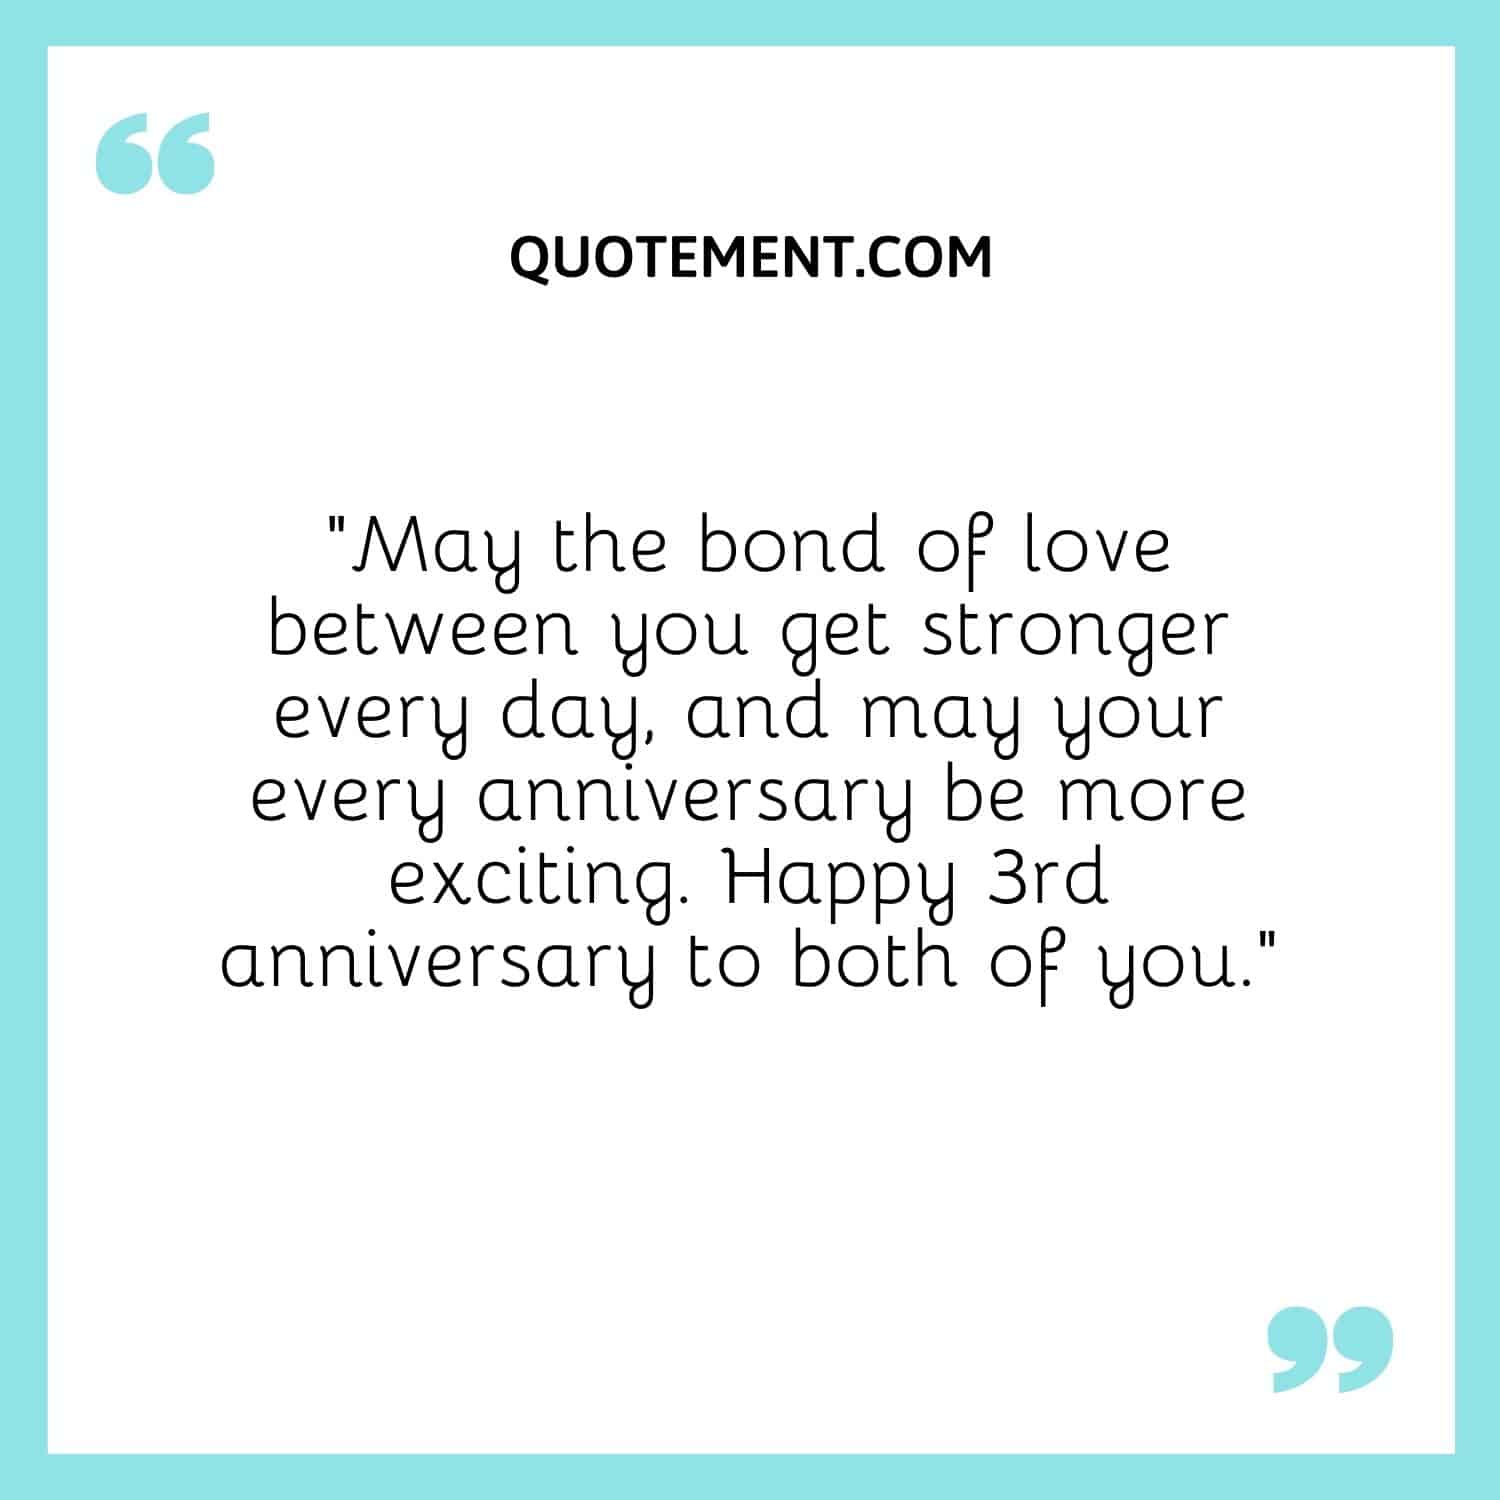 “May the bond of love between you get stronger every day, and may your every anniversary be more exciting. Happy 3rd anniversary to both of you.”